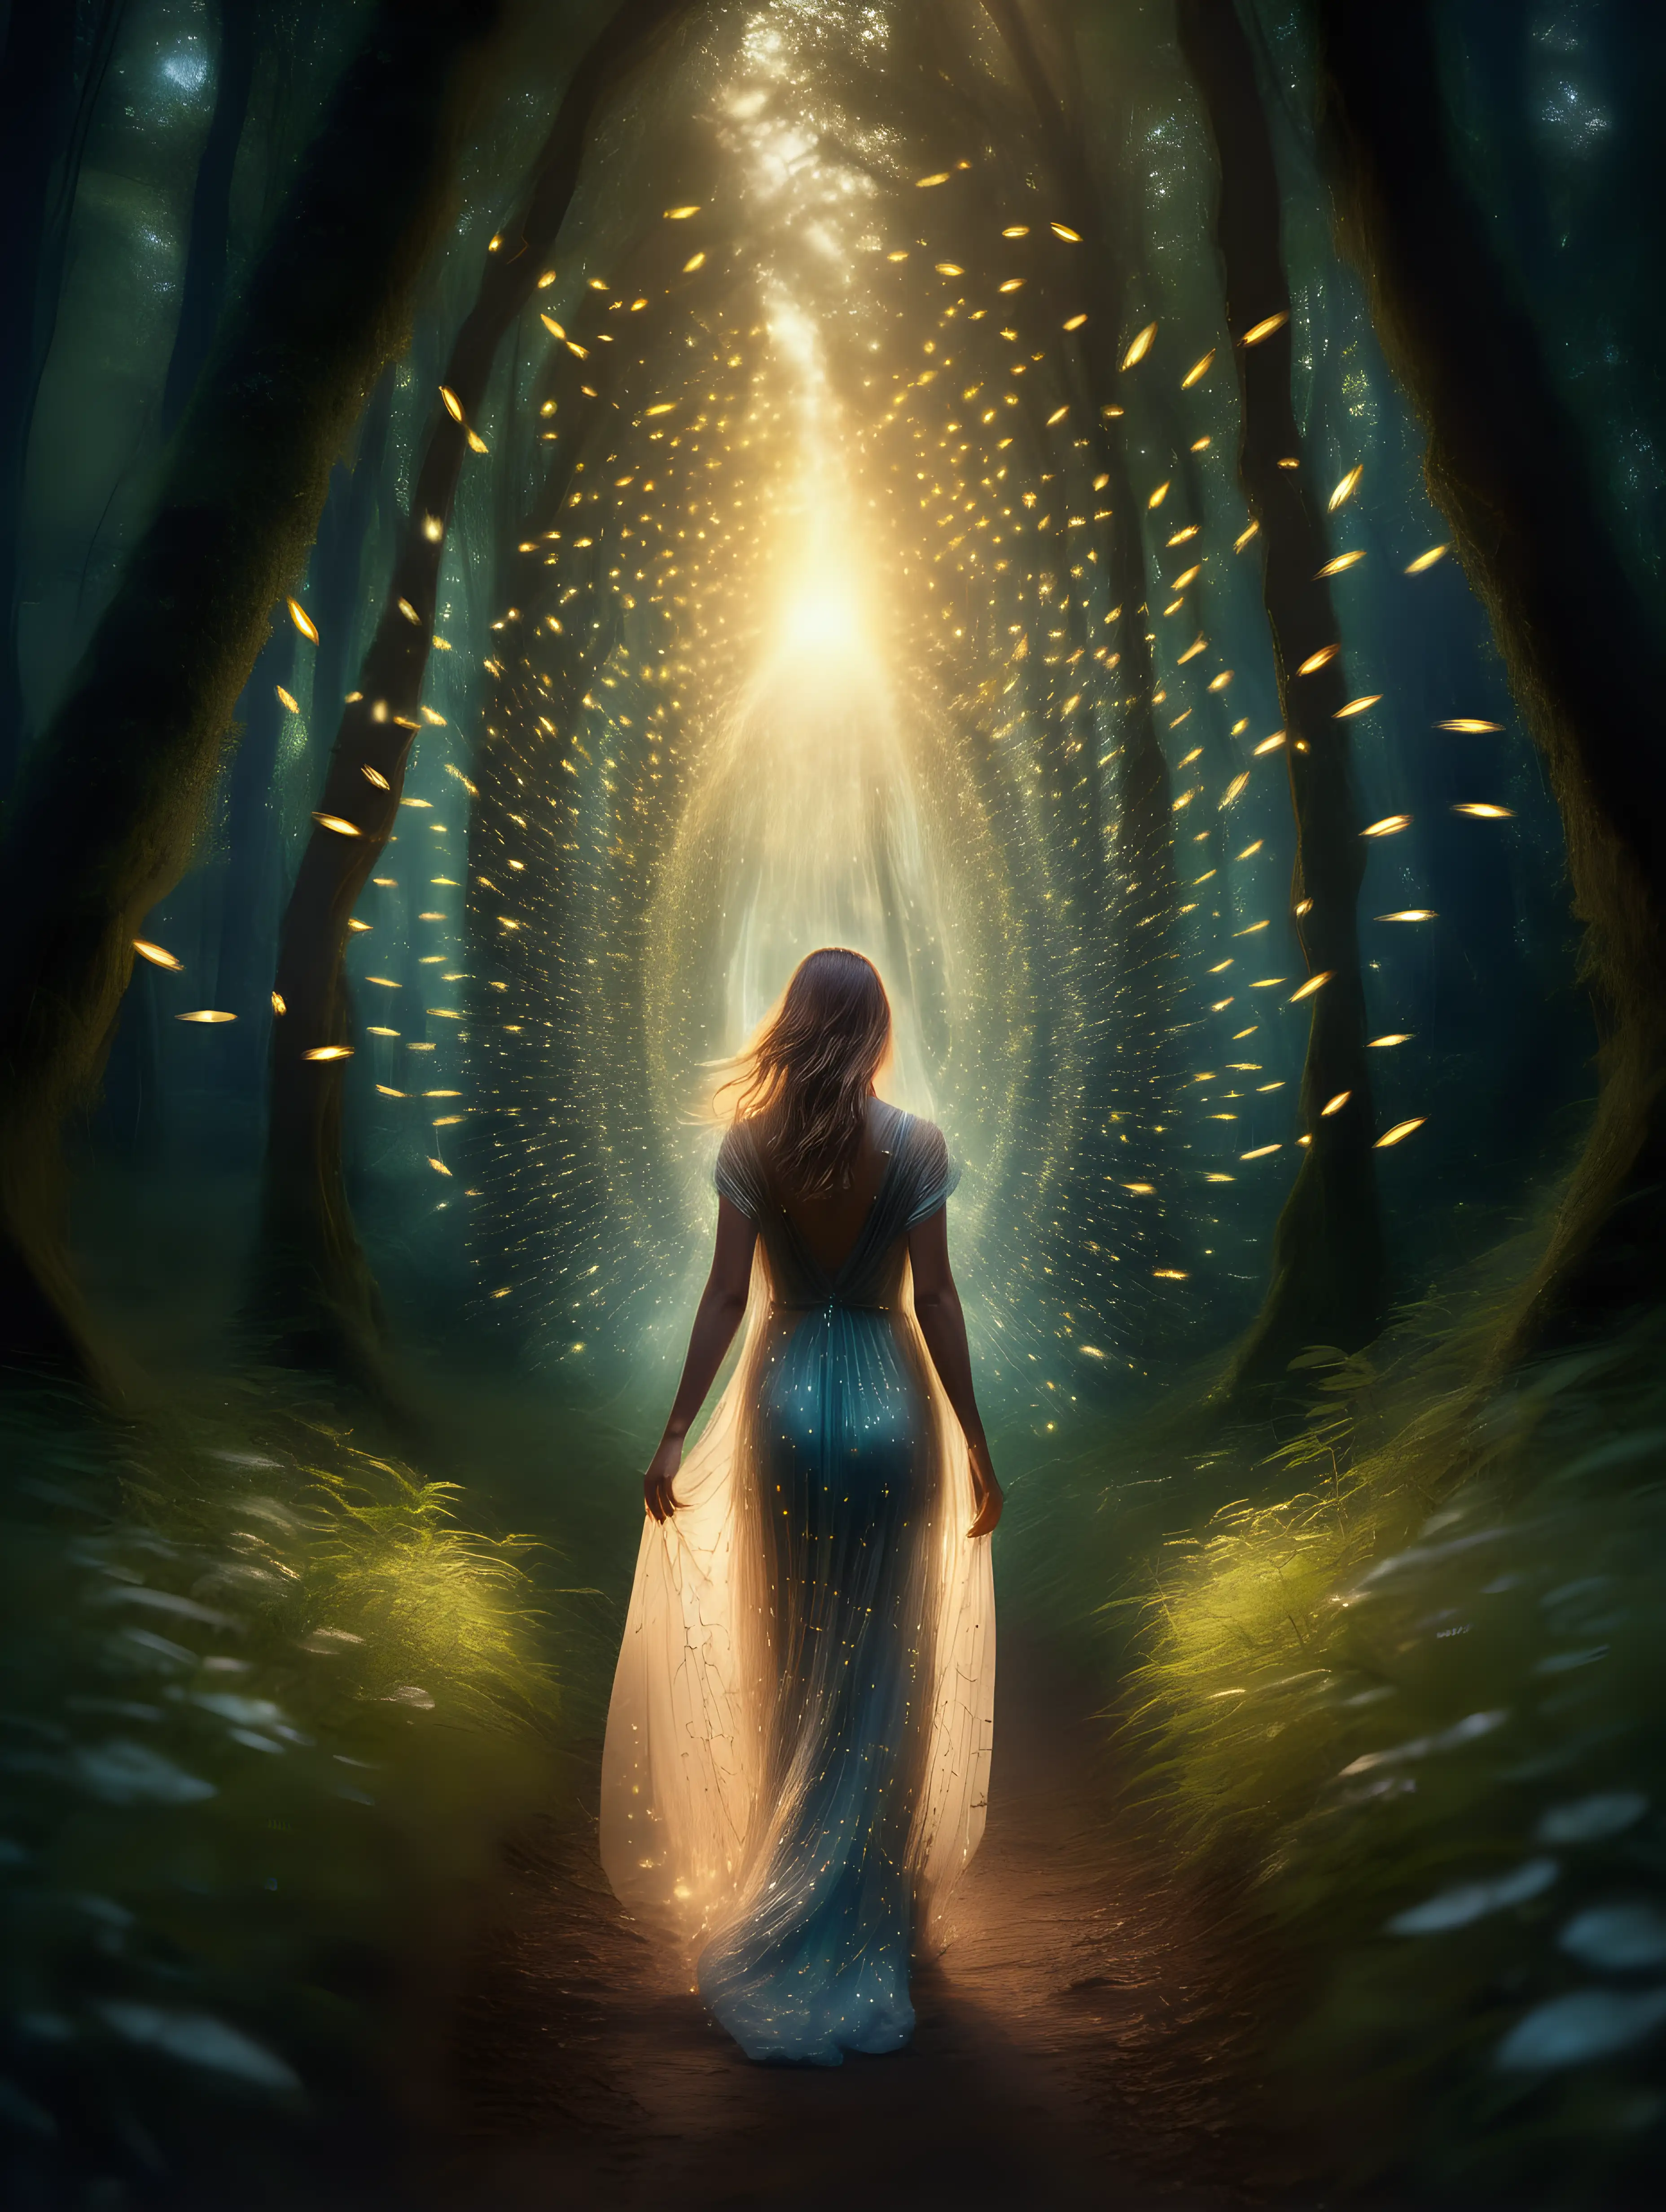 a woman walking through an enchanted forest with a glowing dress of fire flys she is walking towards a portal and sunlight is streaming through the portal 
Theme: mystical, nature, beautiful, goddess, ascension 